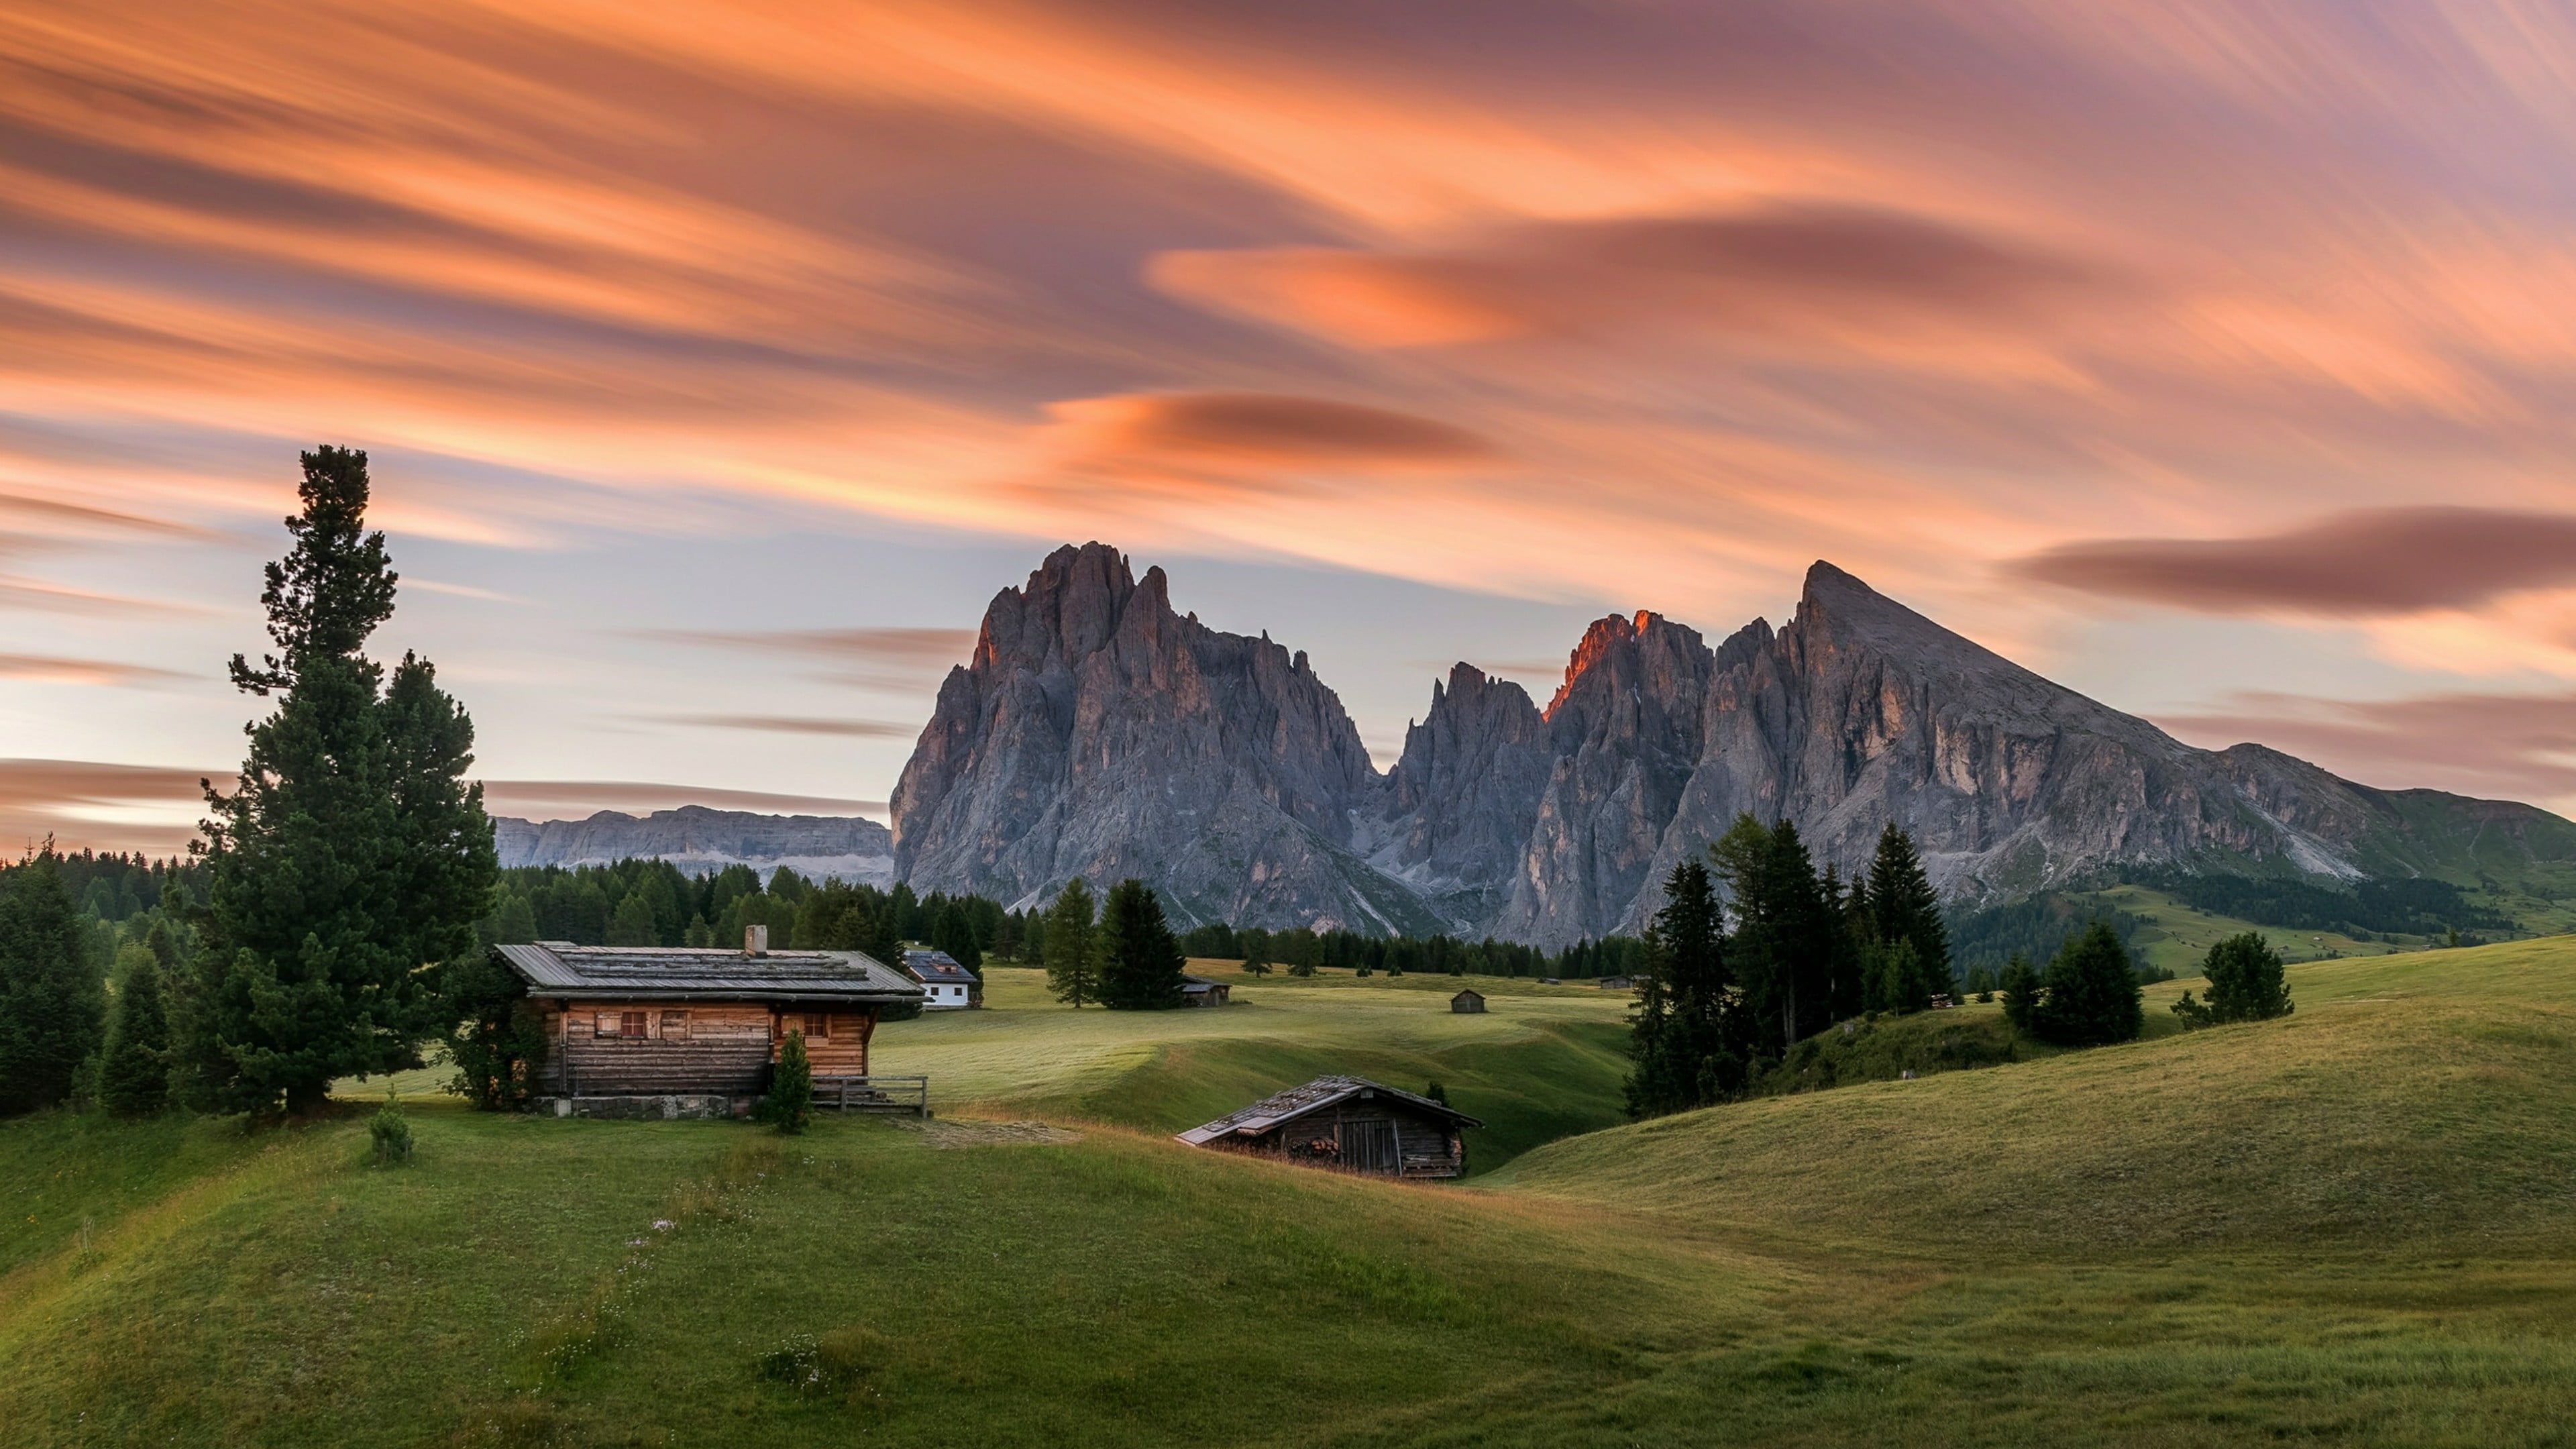 House In Dolomites Wallpapers